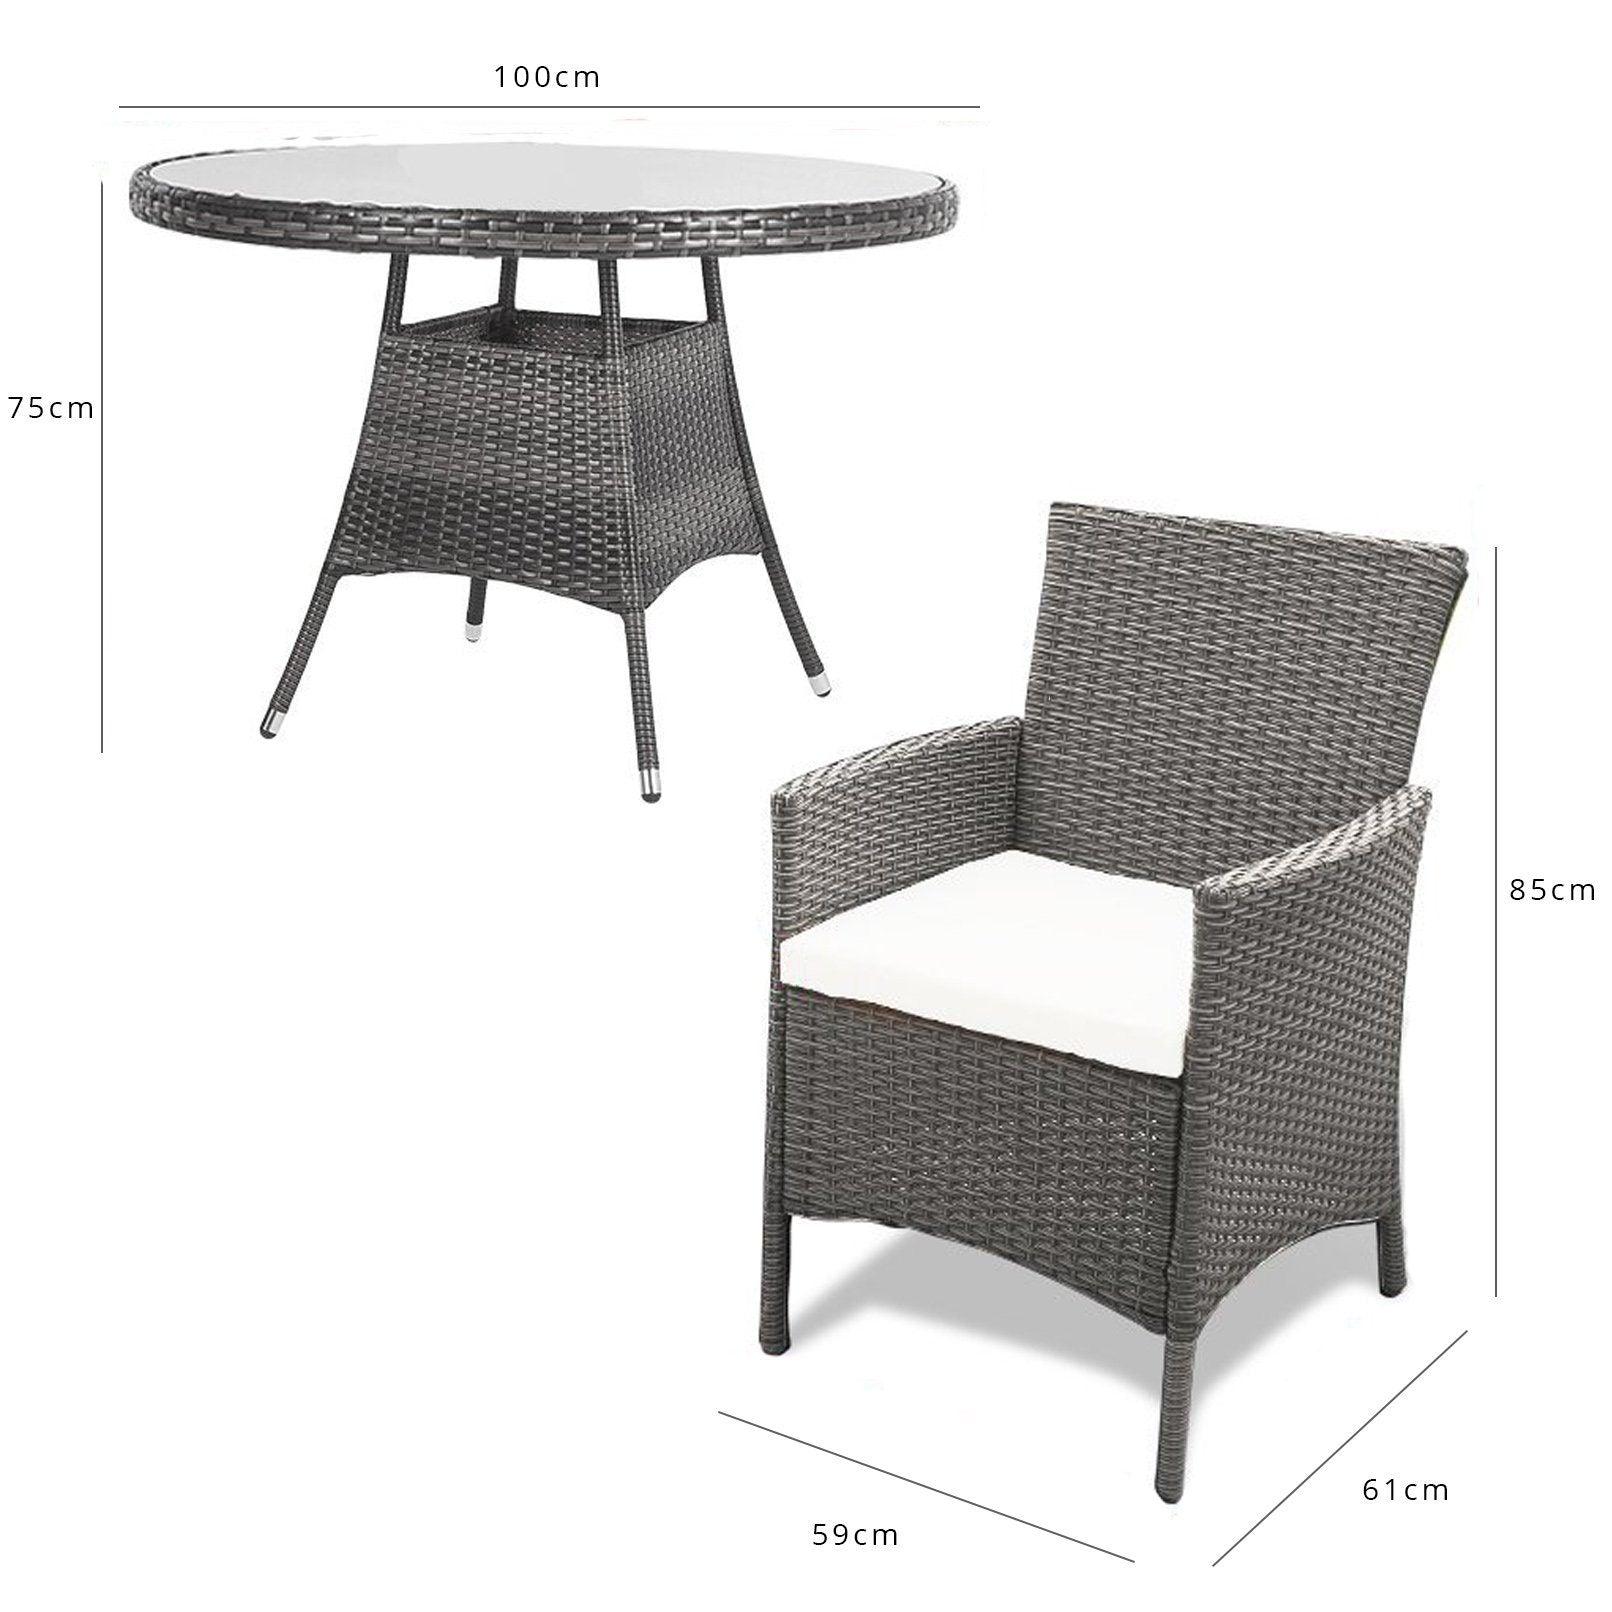 4 Seater Rattan Round Dining Table & Chair Set - Grey - Laura James